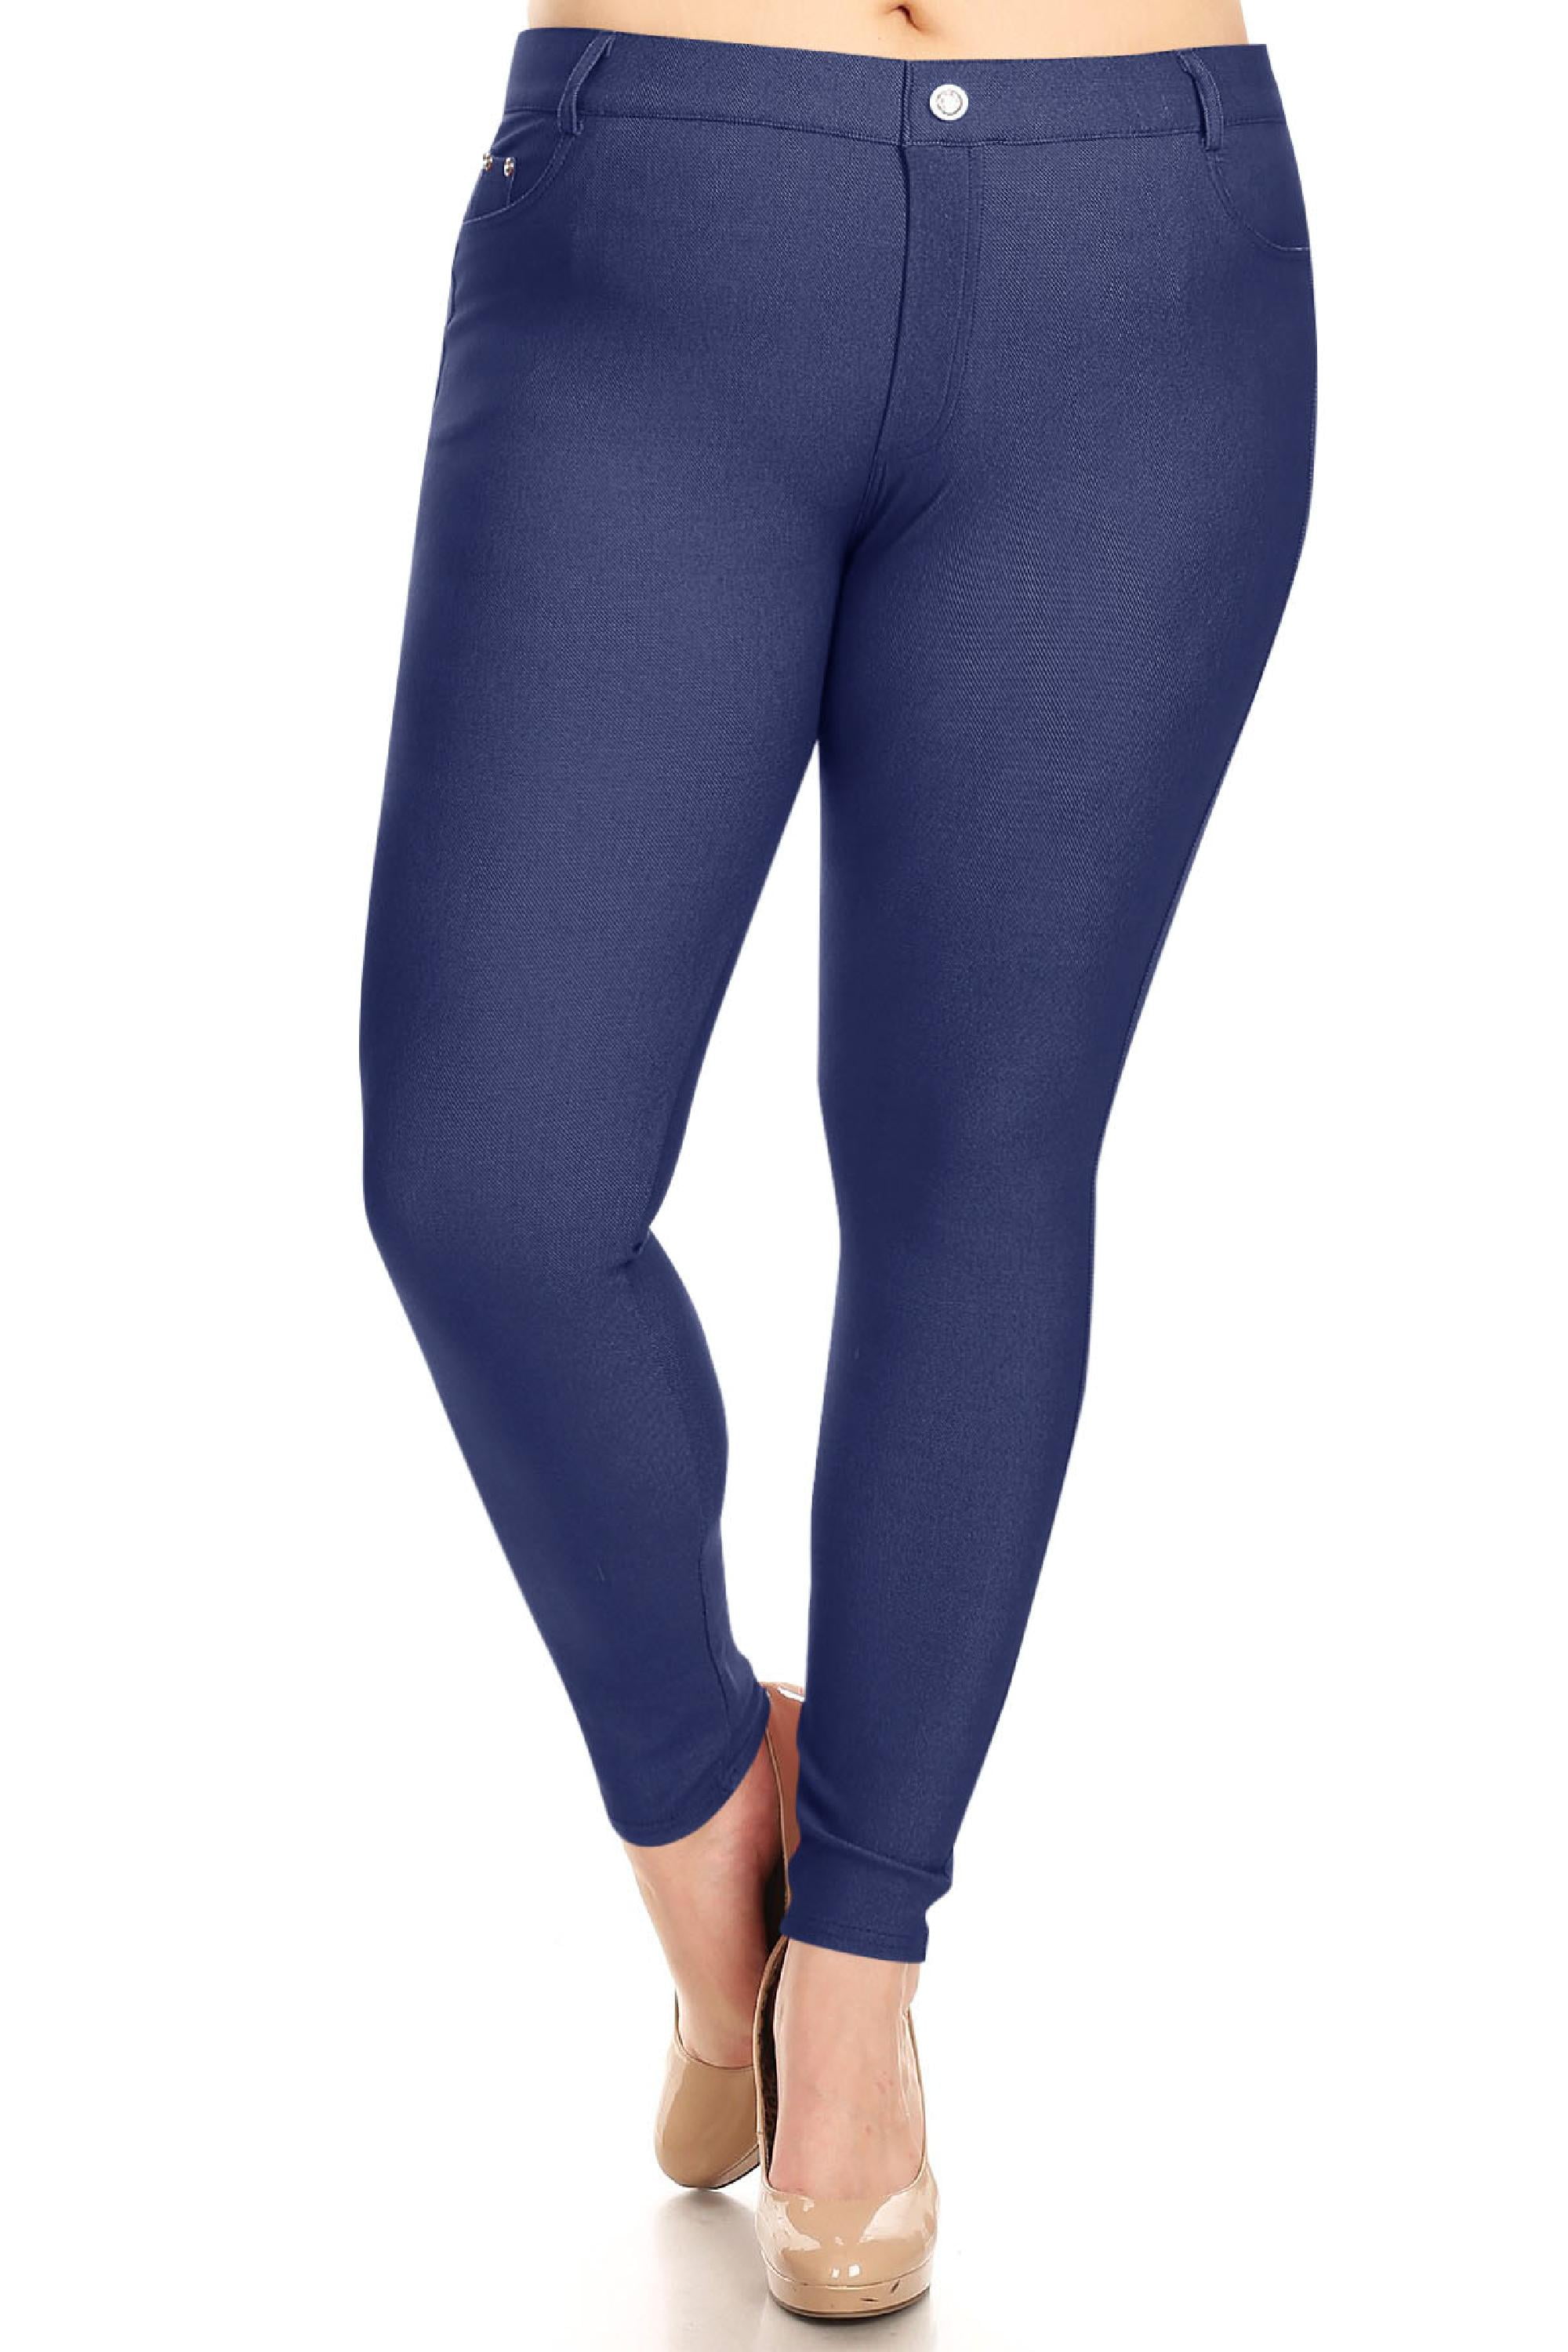 XIAOBU Plus Size Jeggings Women's High Waist Elastic Casual Tights Slim  Pants Plaid Ripped-Jeans-Like Sports Leggings,Blue,L at  Women's  Clothing store